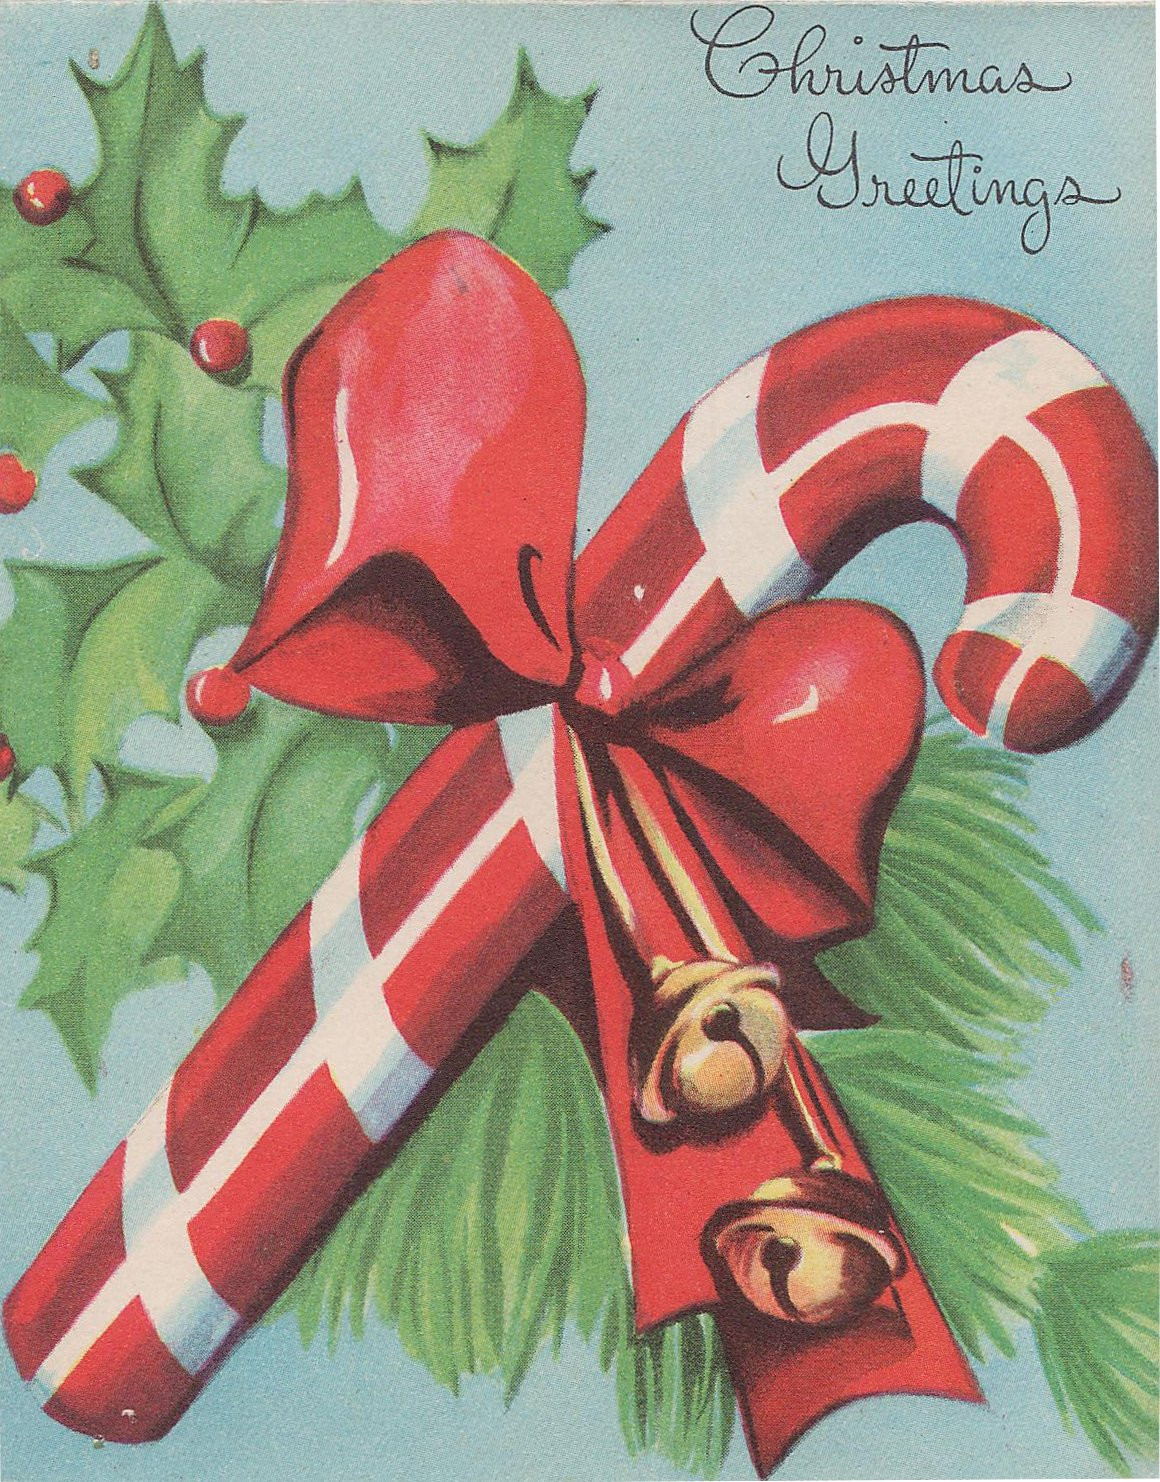 Vintage Christmas Candy
 Candy Cane Vintage Christmas Card